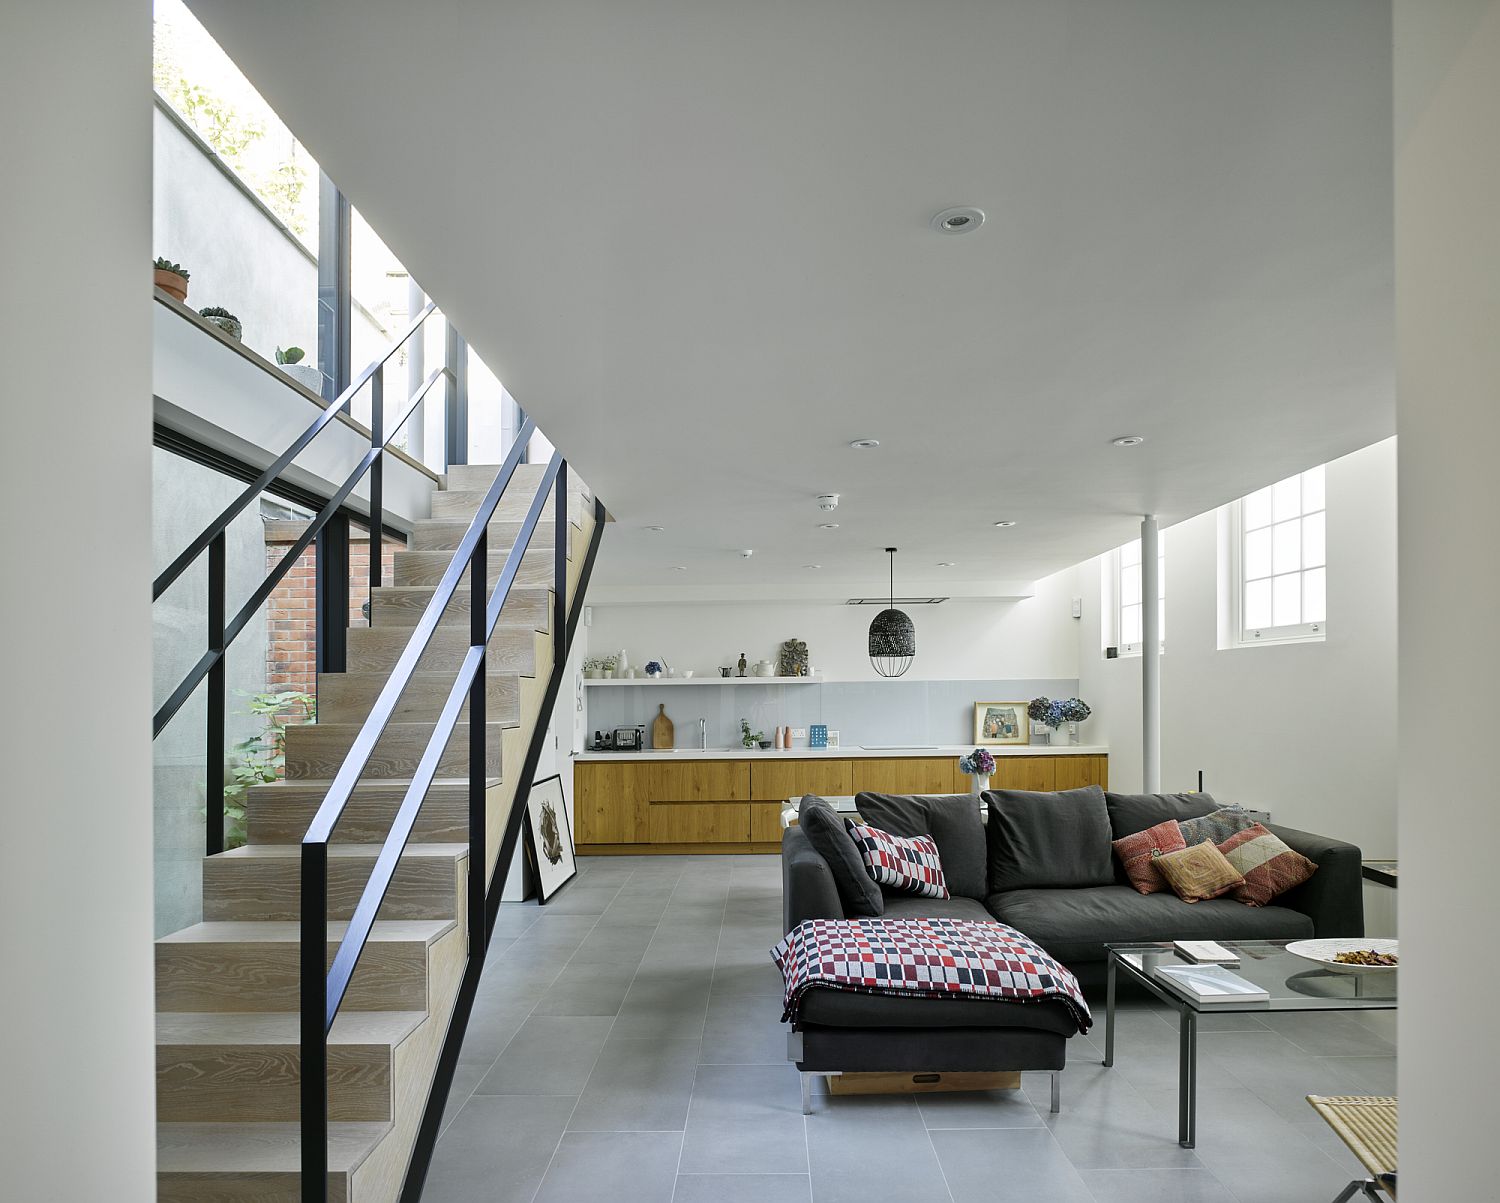 Lower level living area of the Gallery House in London